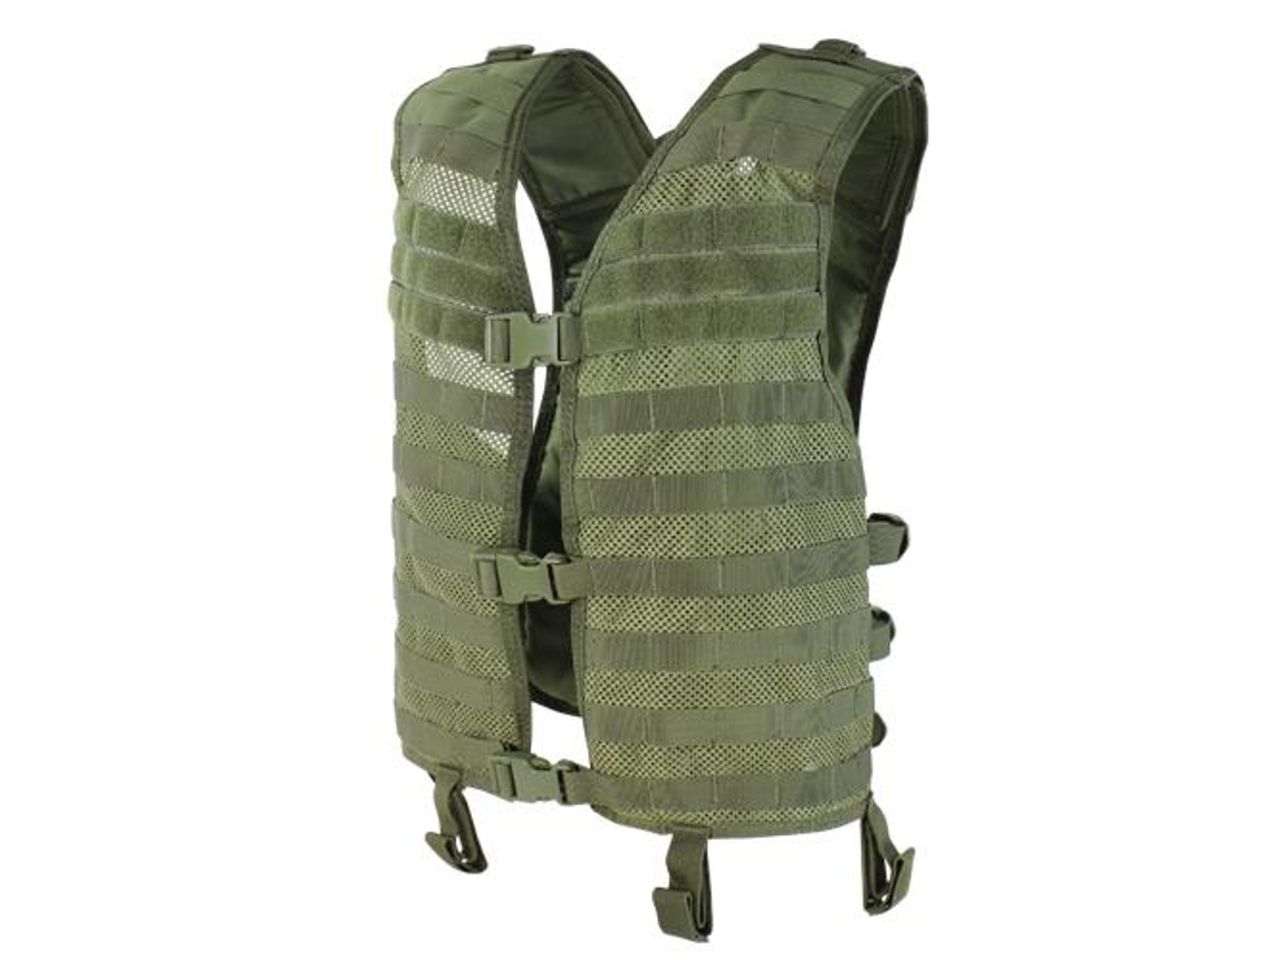 Condor MOLLE Mesh Hydration Tactical Vest, OD Green